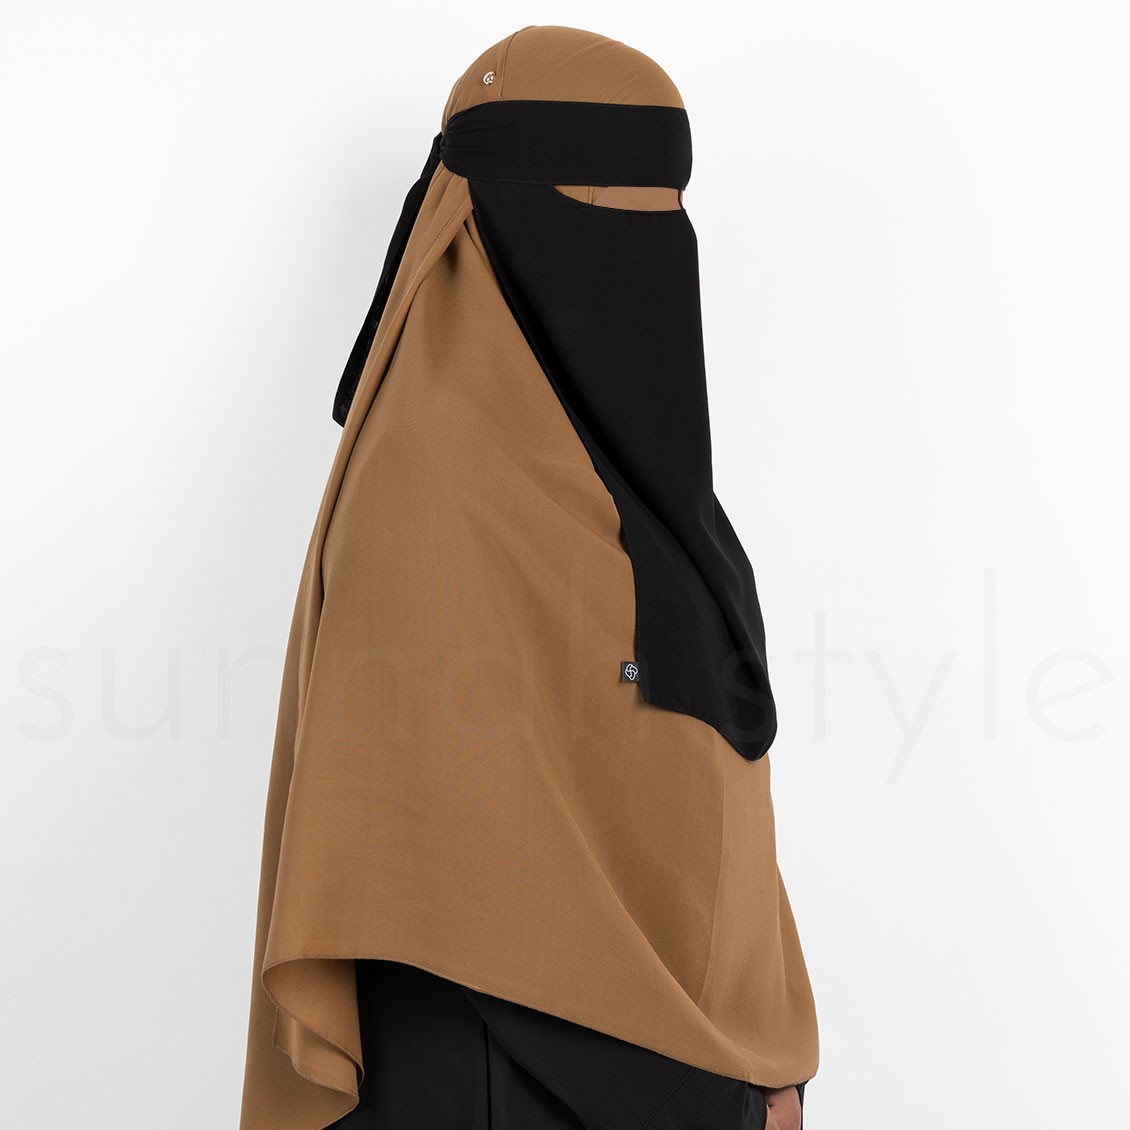 Sunnah Style One Layer Niqab w Nose String Black